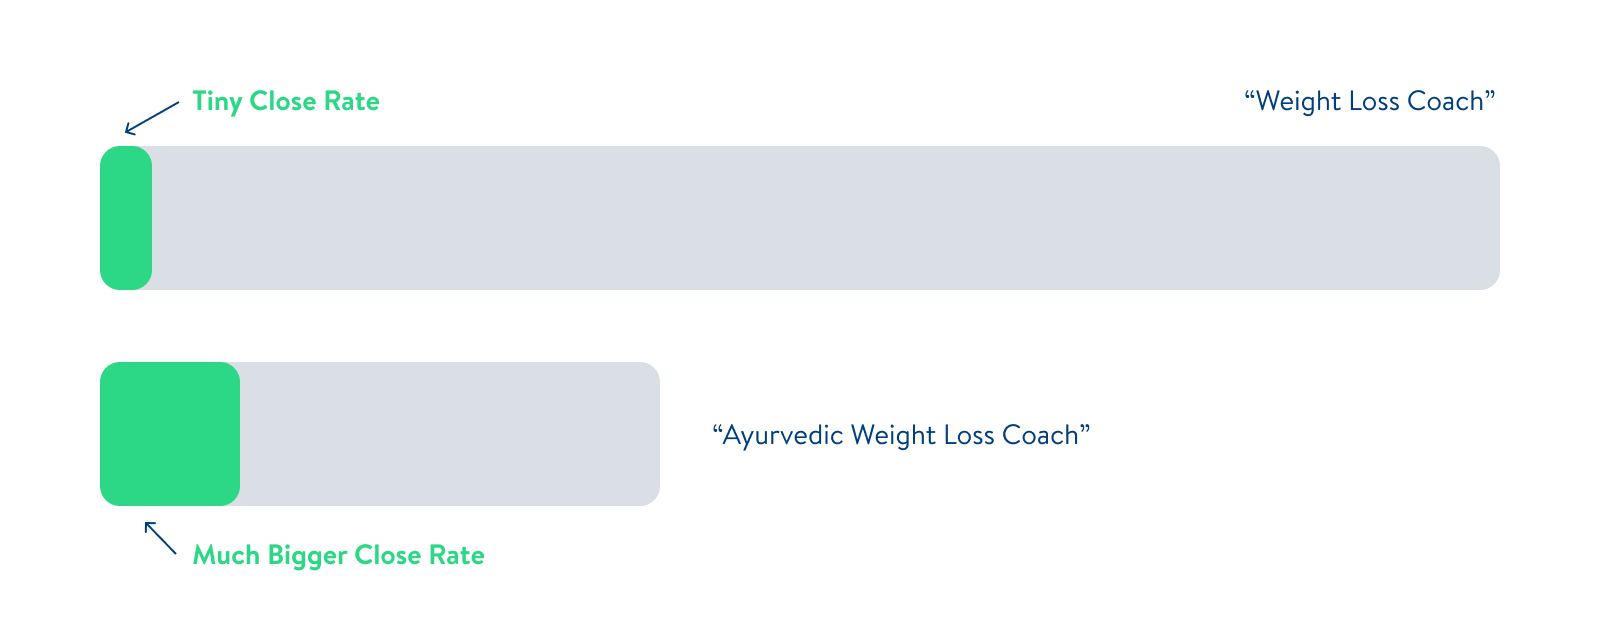 "Weight loss coach" has a tiny close rate while the more niche "Ayurvedic Weight Loss Coach" has a much bigger close rate.